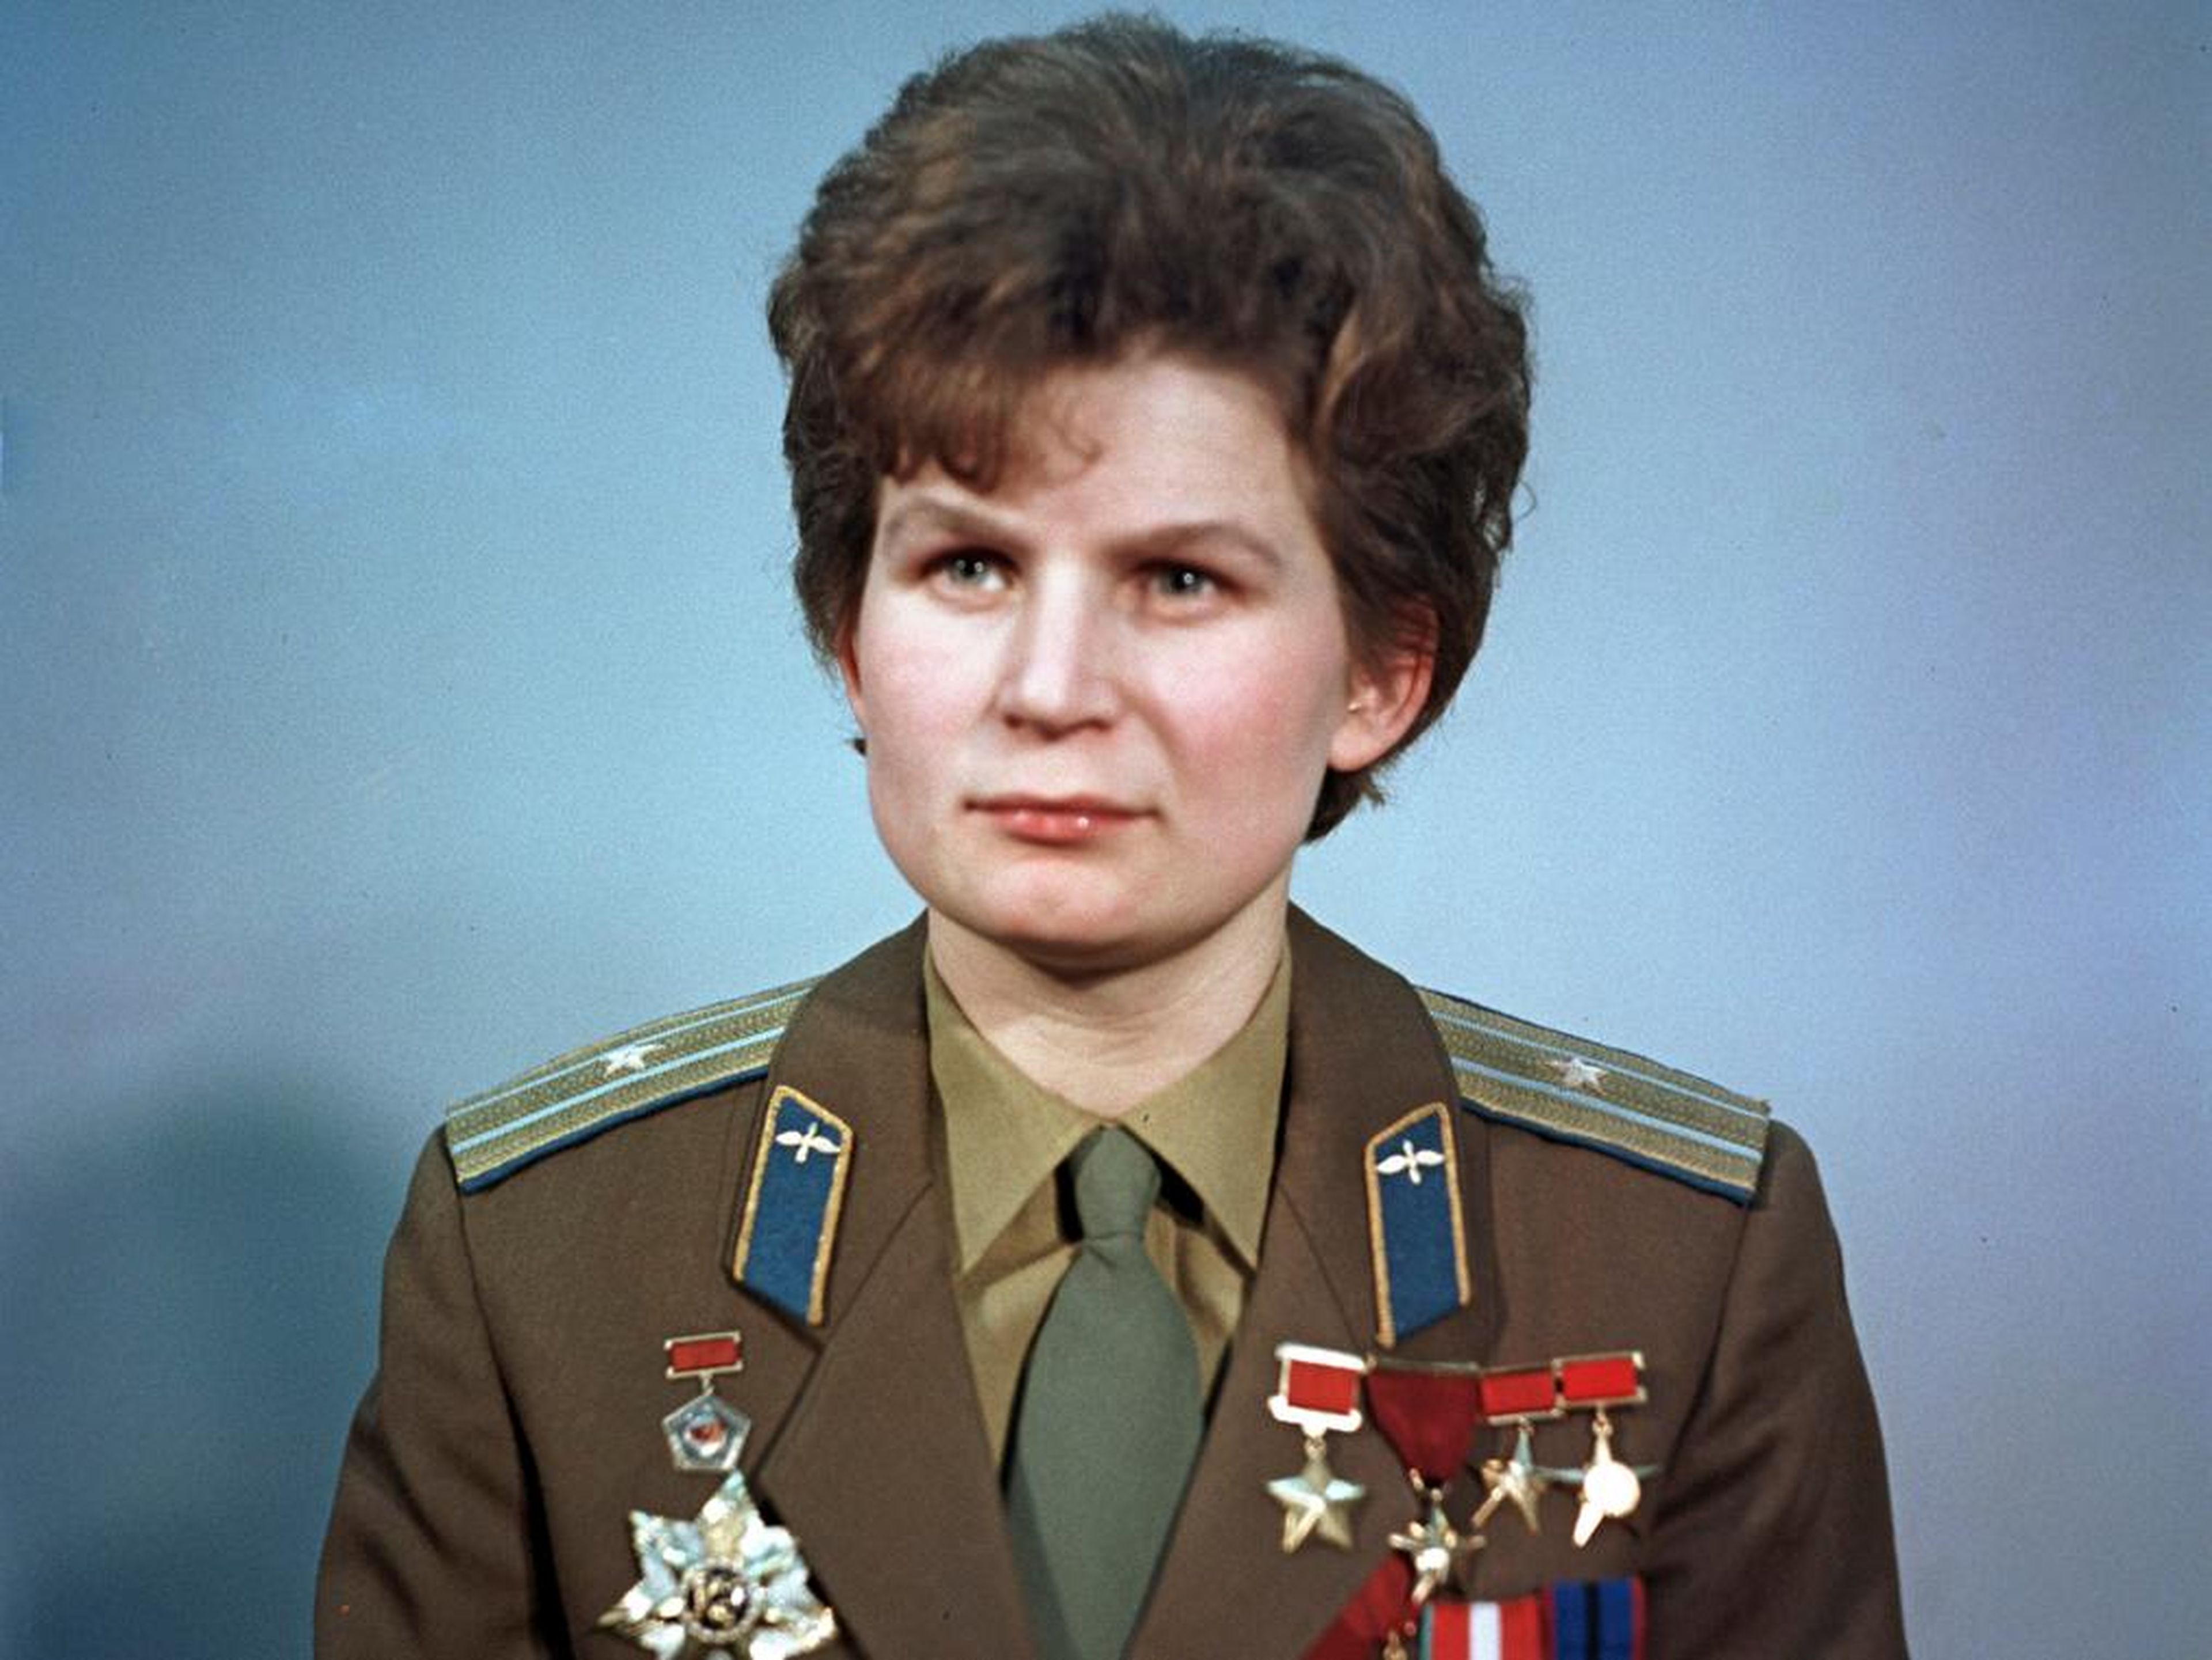 Valentina Tereshkova became the first woman to go to space in 1963.